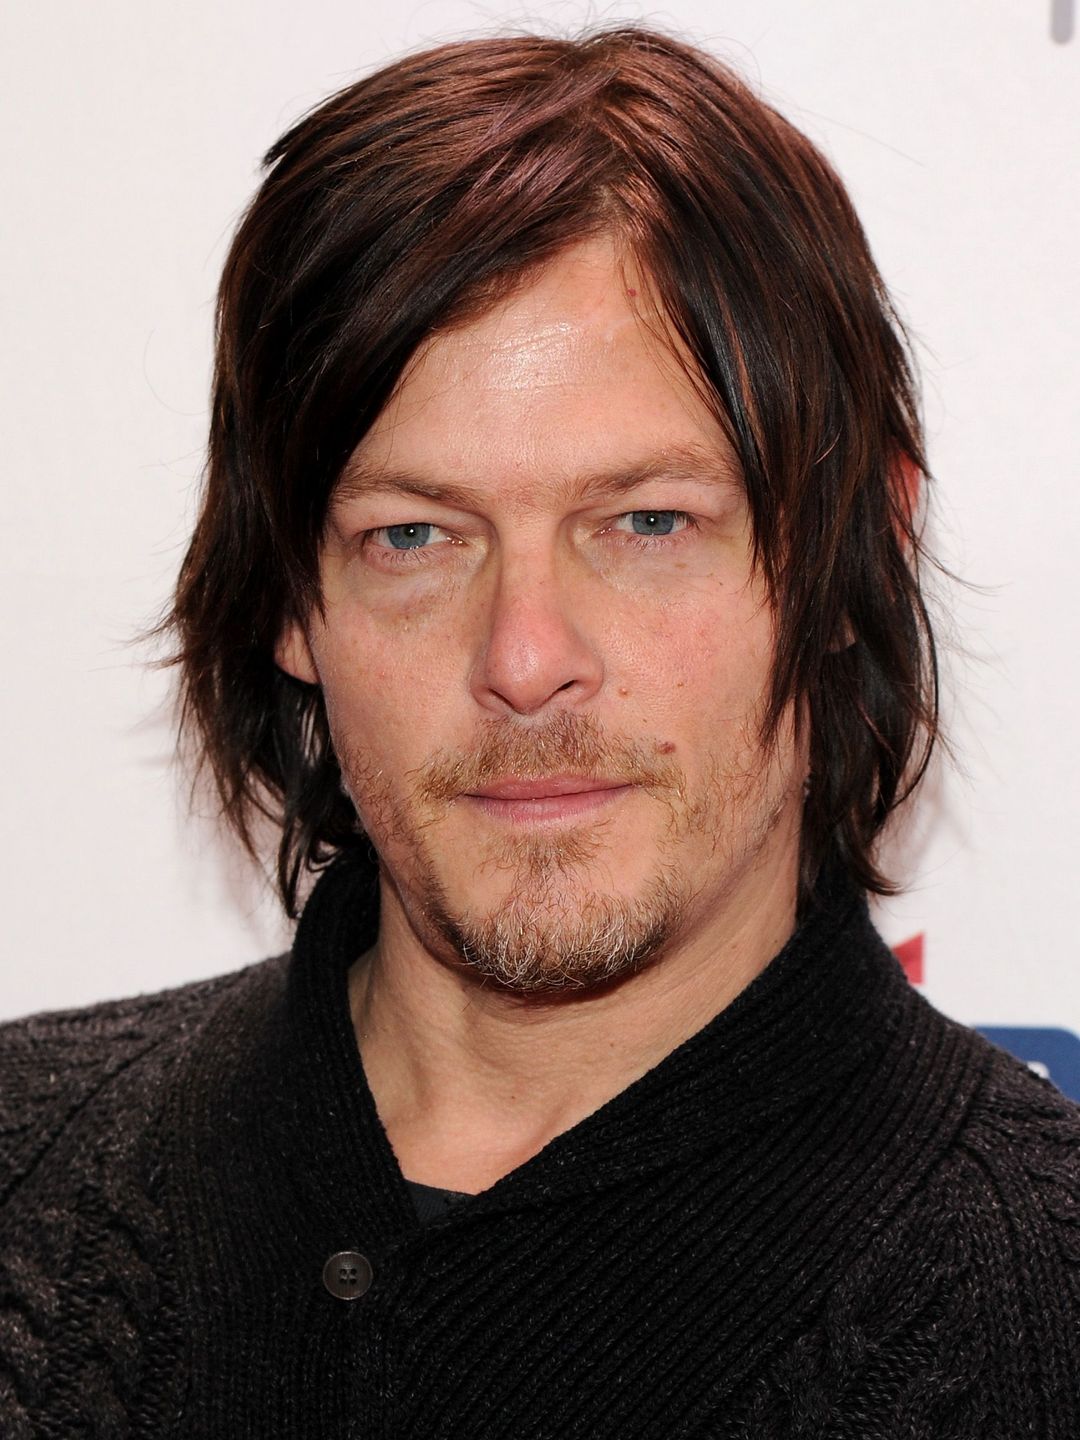 Norman Reedus young pics